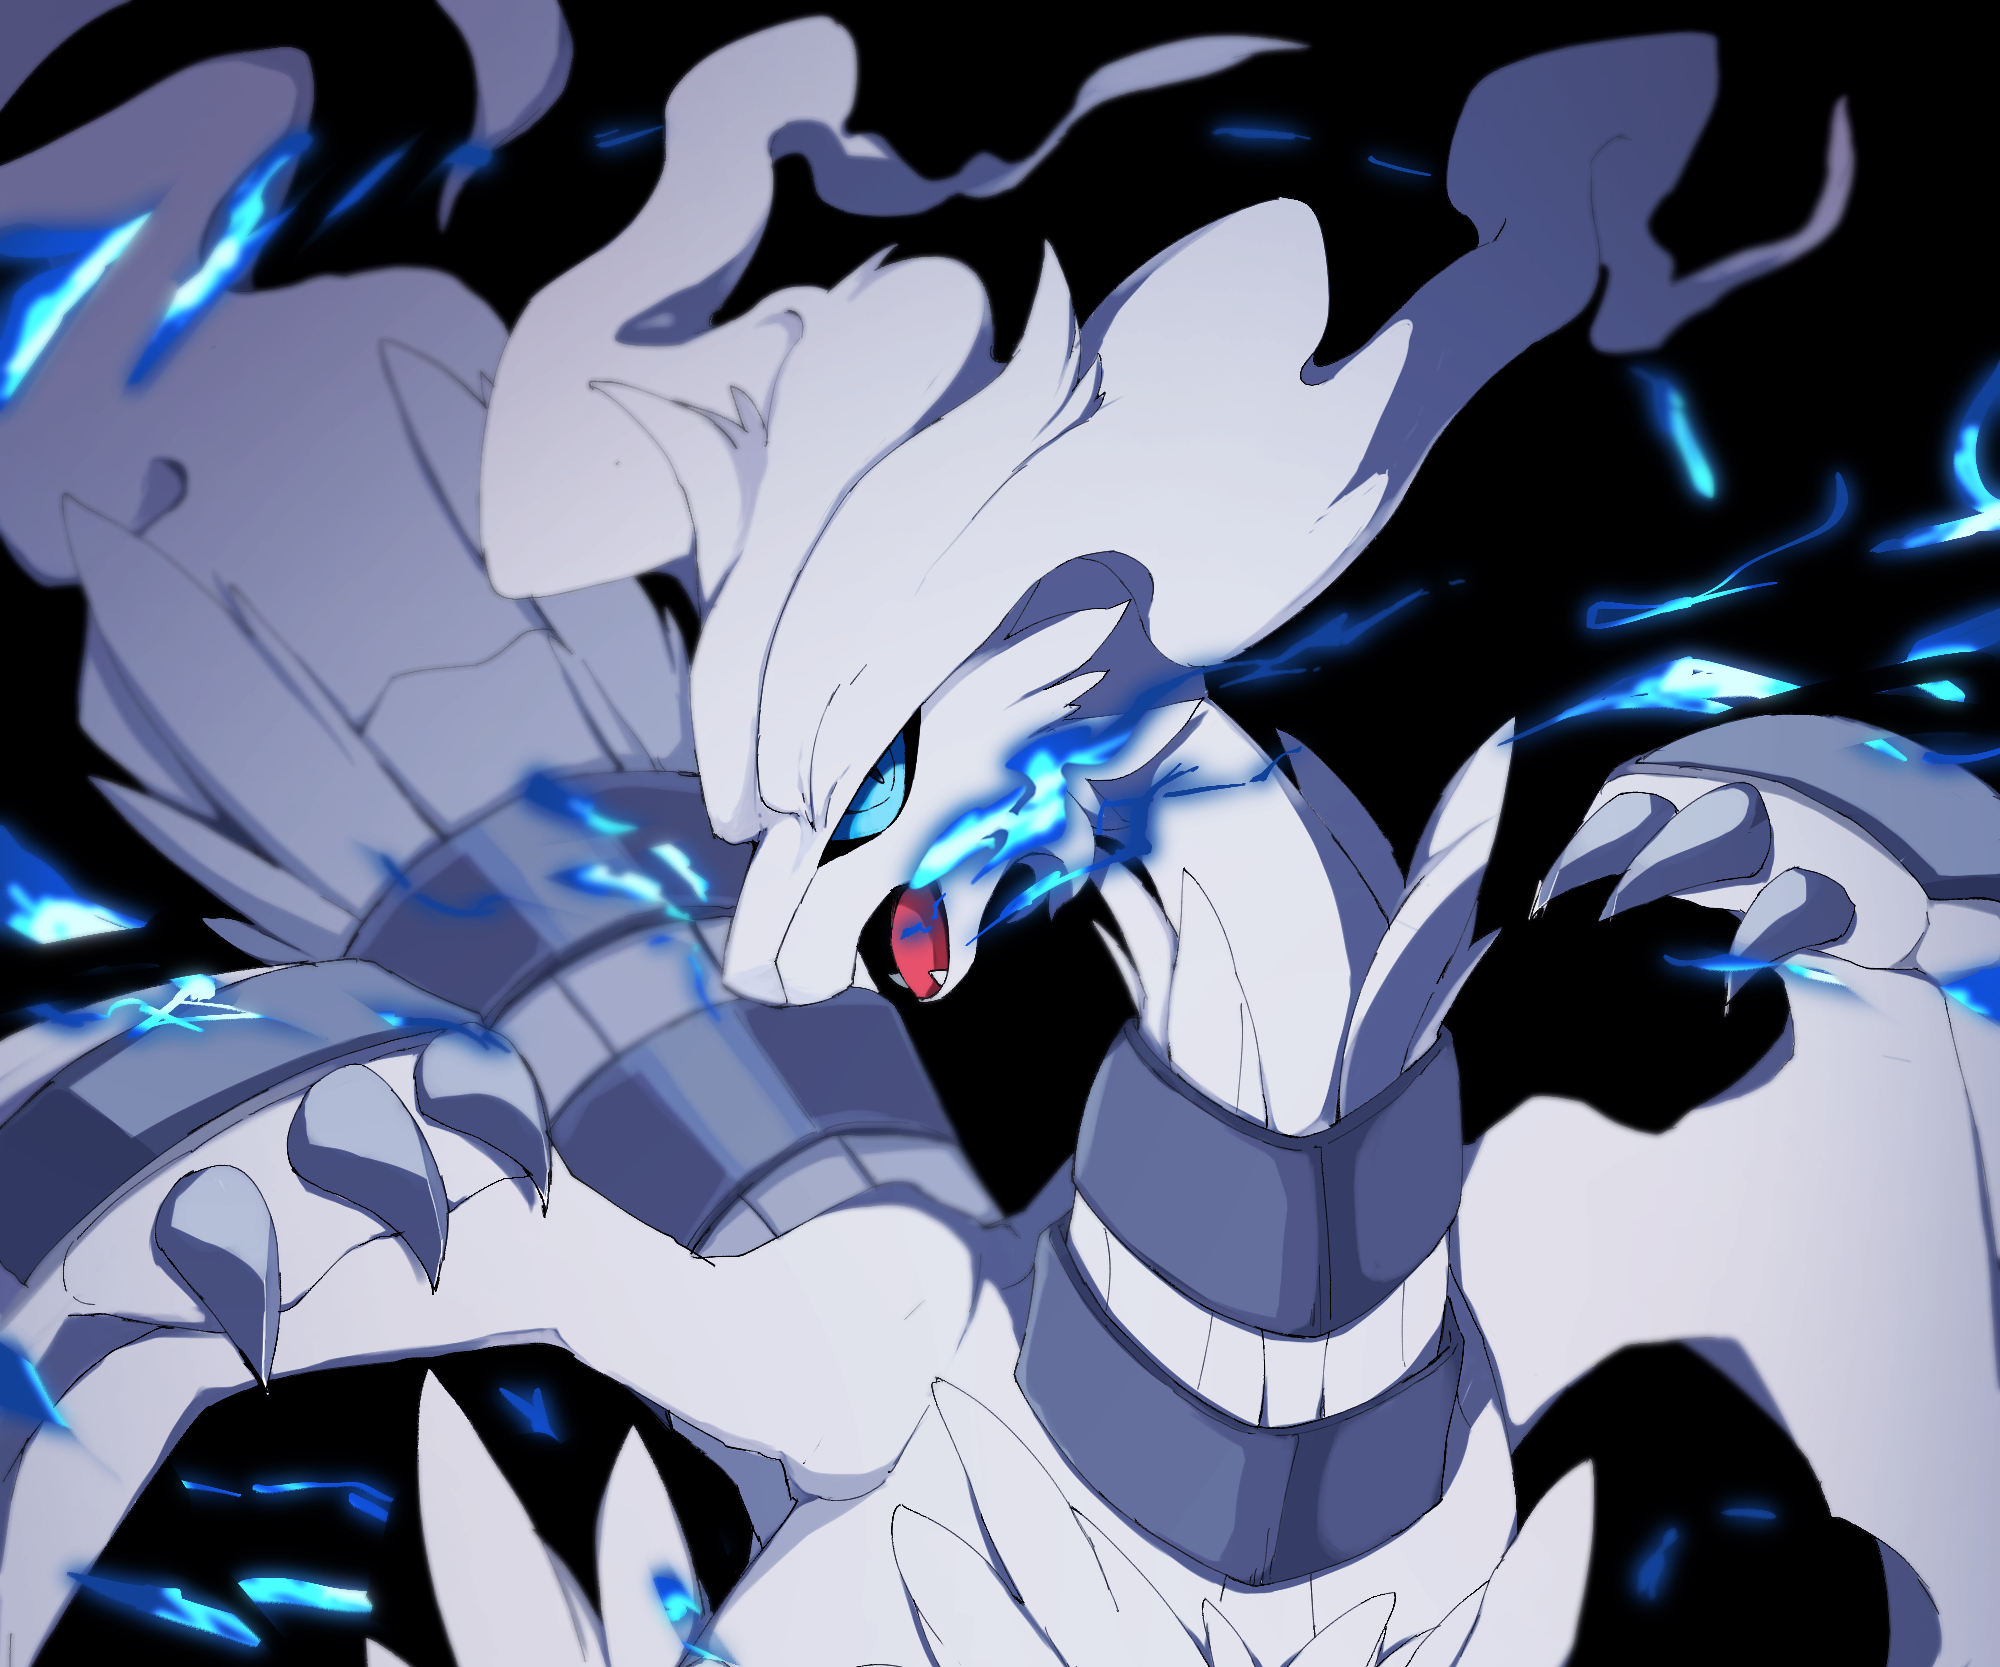 20 Reshiram Pokémon HD Wallpapers and Backgrounds